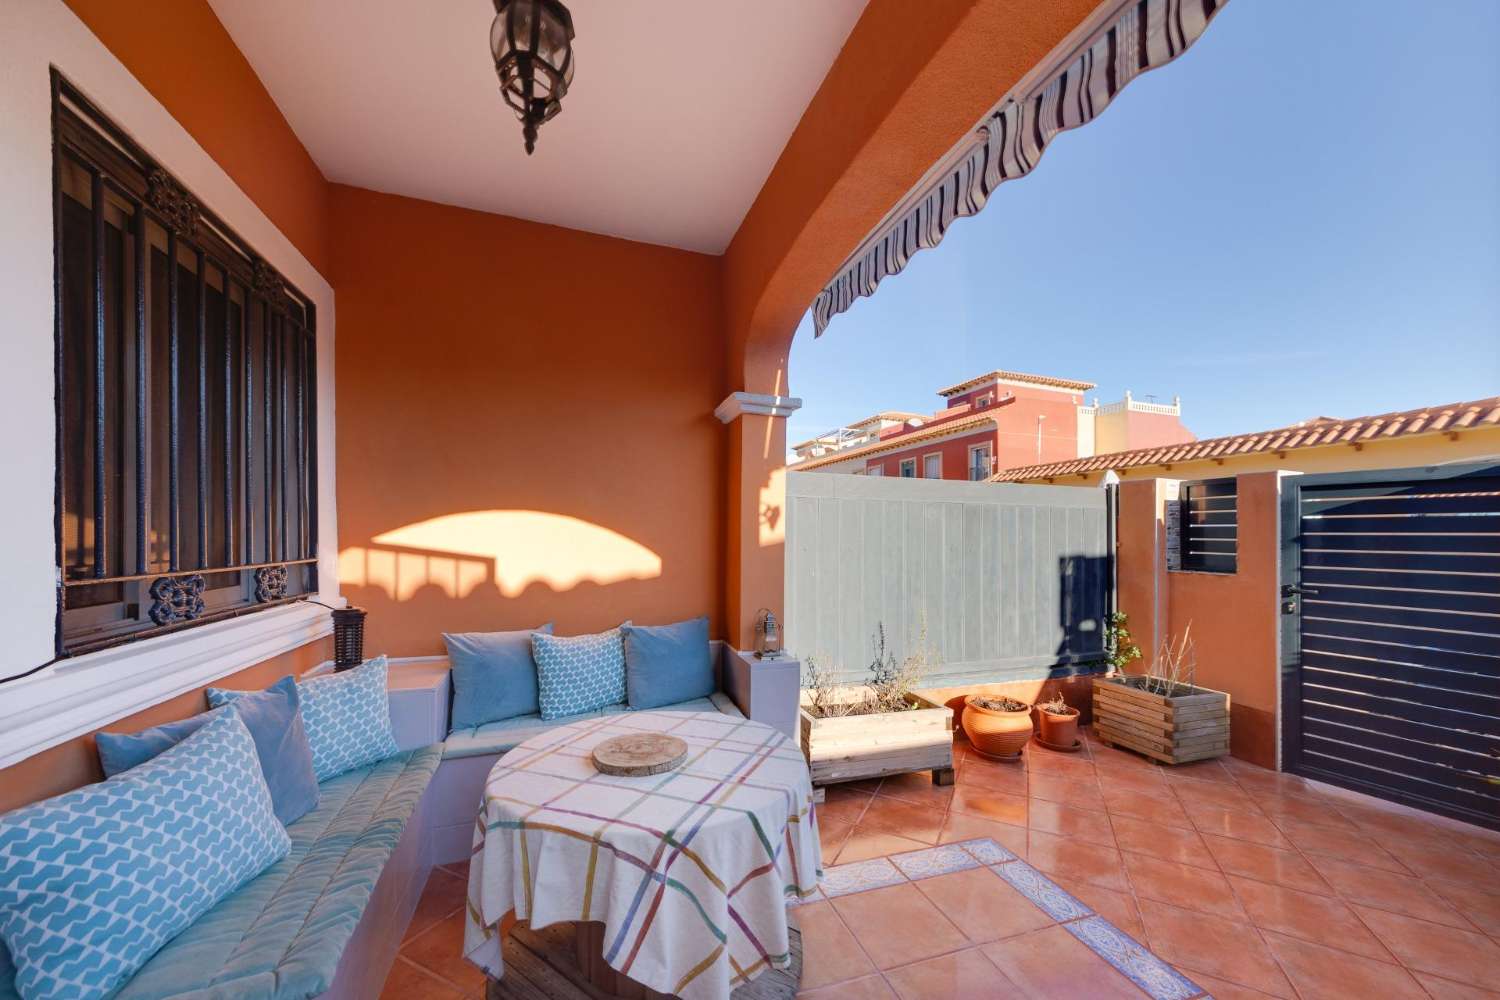 FULLY RENOVATED 2 BEDROOM HOUSE WITH GARDEN, SOLARIUM AND POOL IN TORREVIEJA